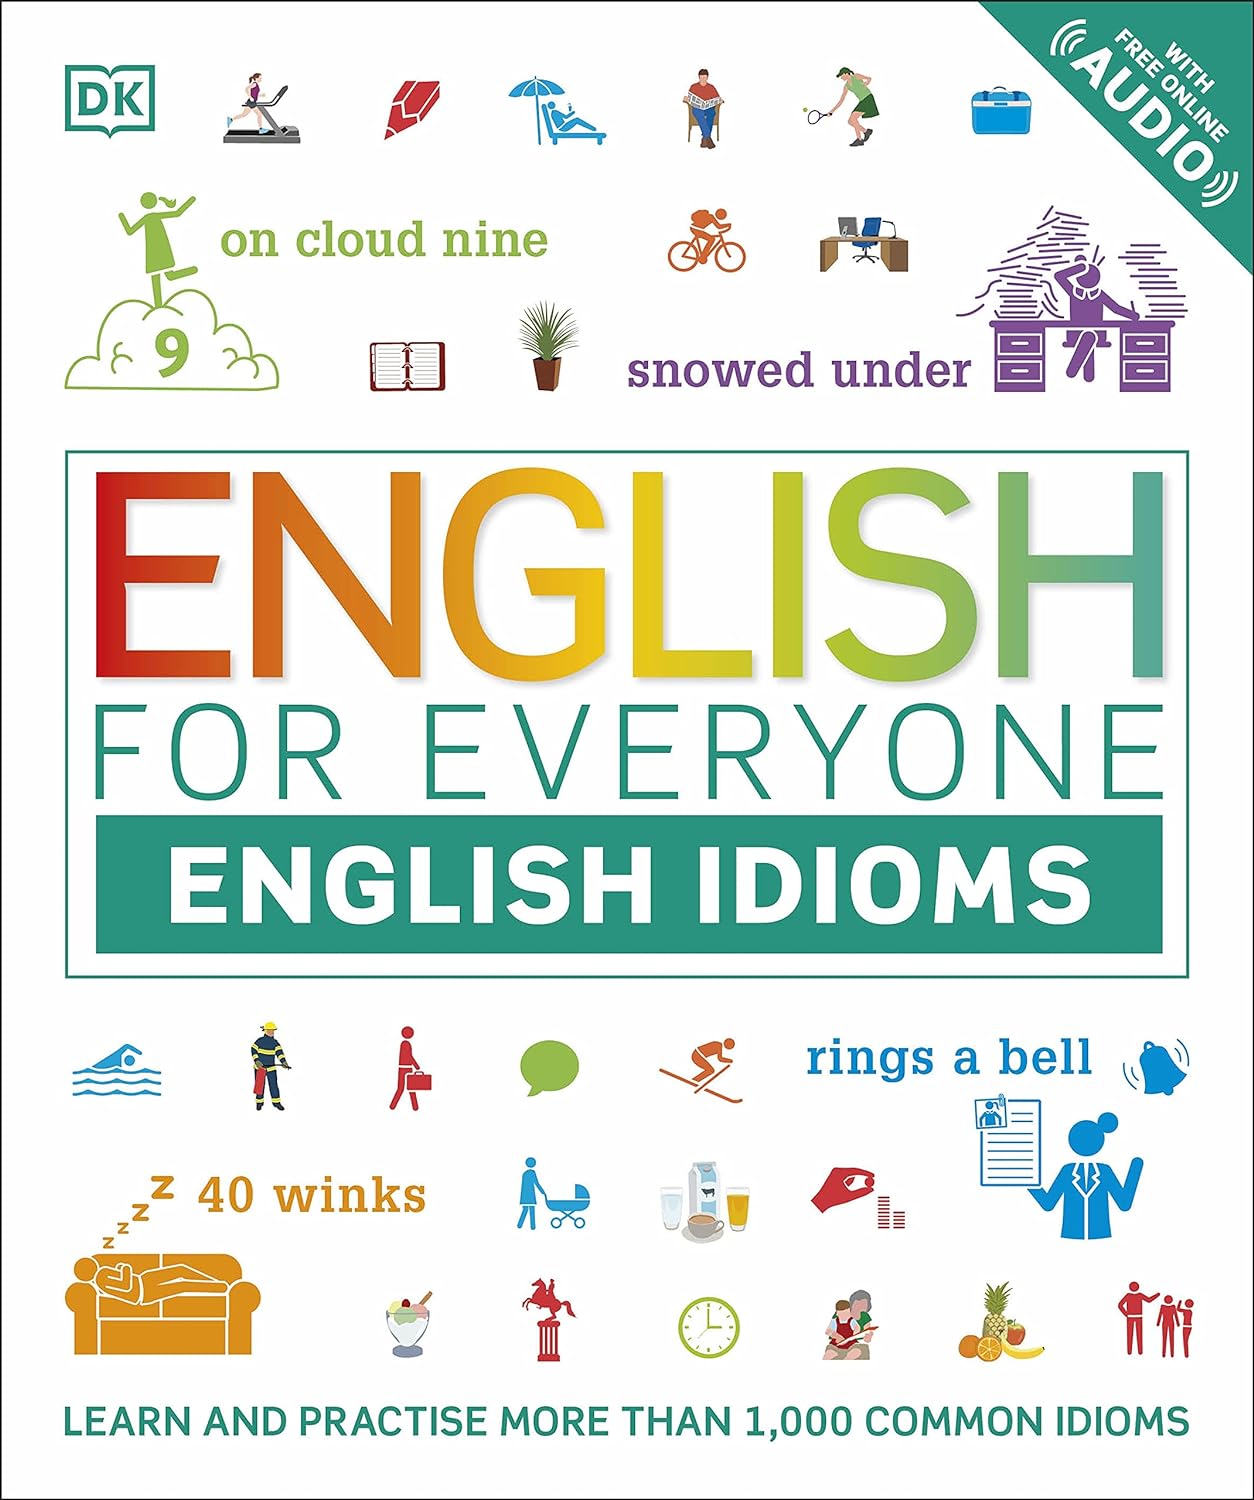 English For Everyone English Idioms: Learn & Practise Common idioms and expressions